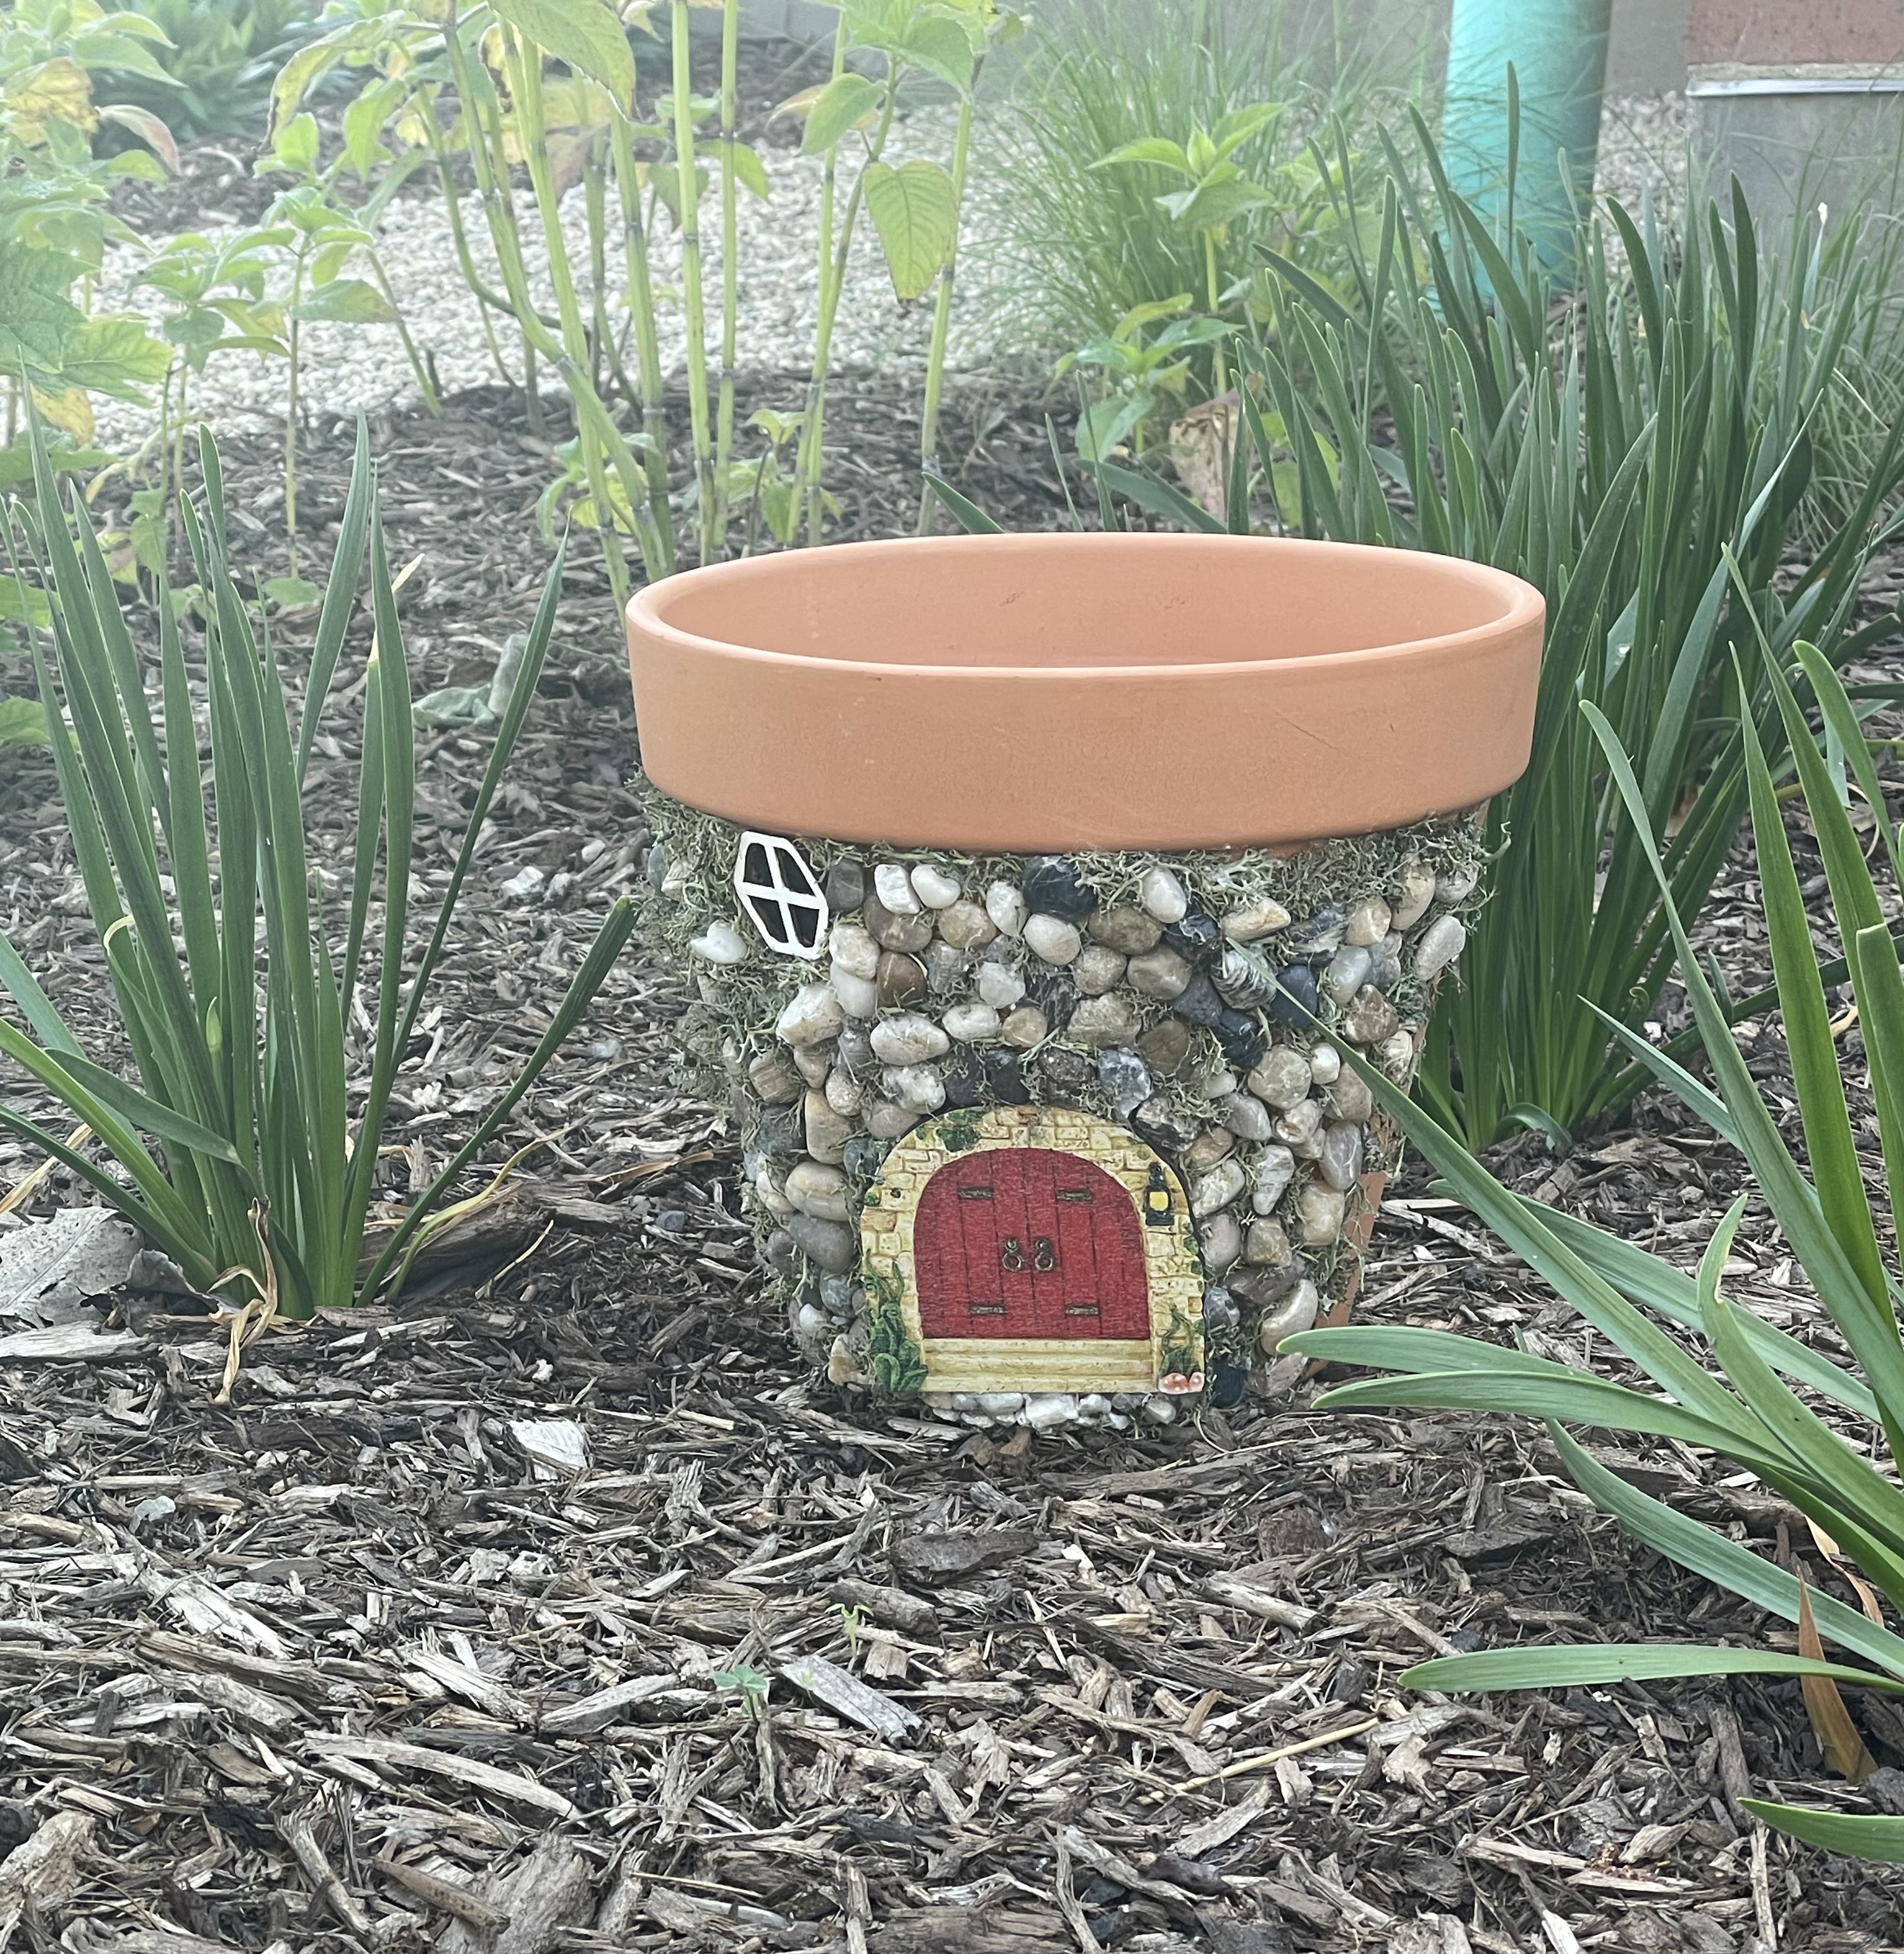 Picture of the Fairy Planter Craft